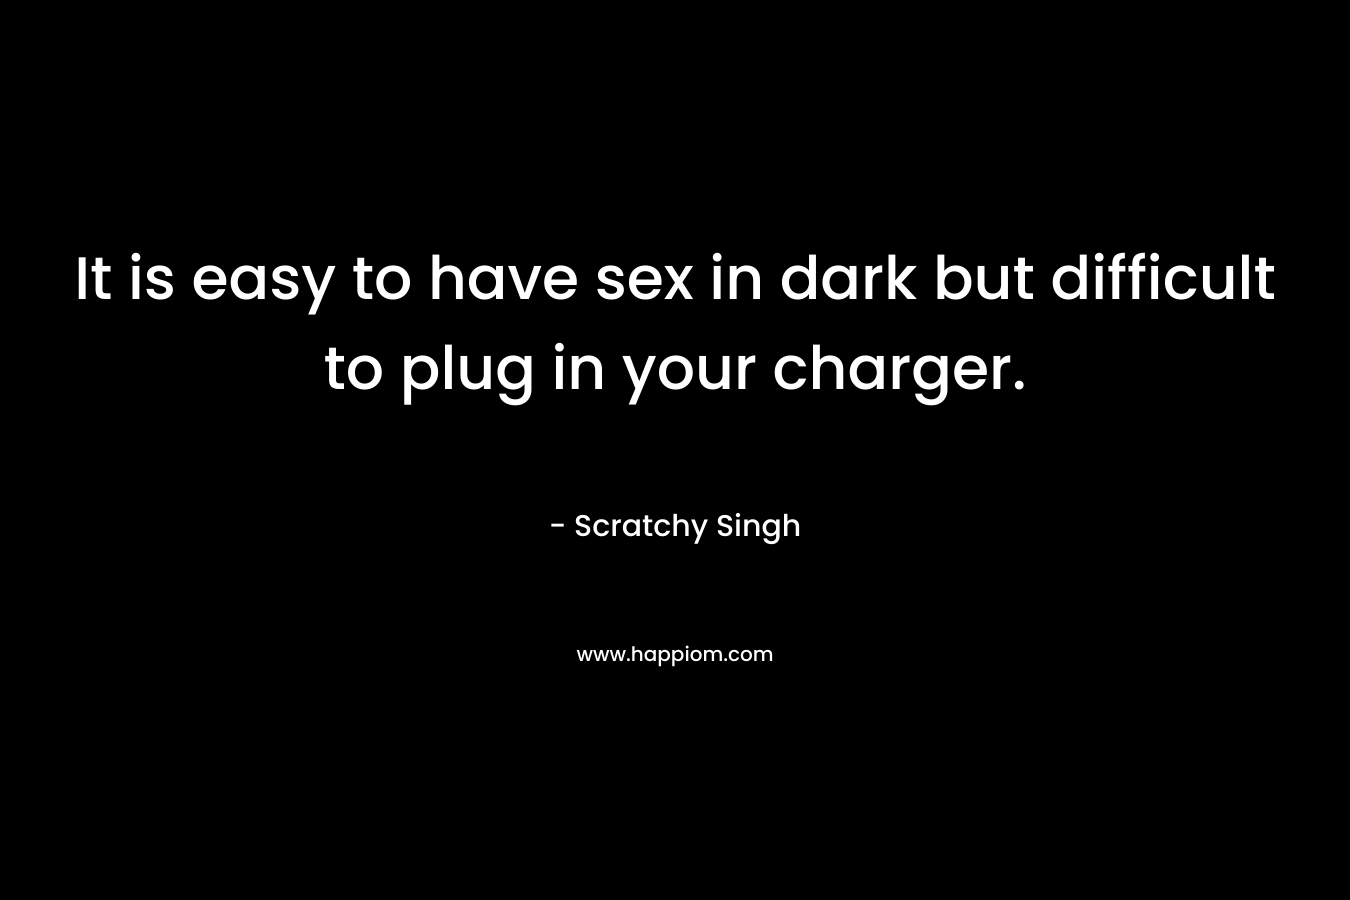 It is easy to have sex in dark but difficult to plug in your charger. – Scratchy Singh